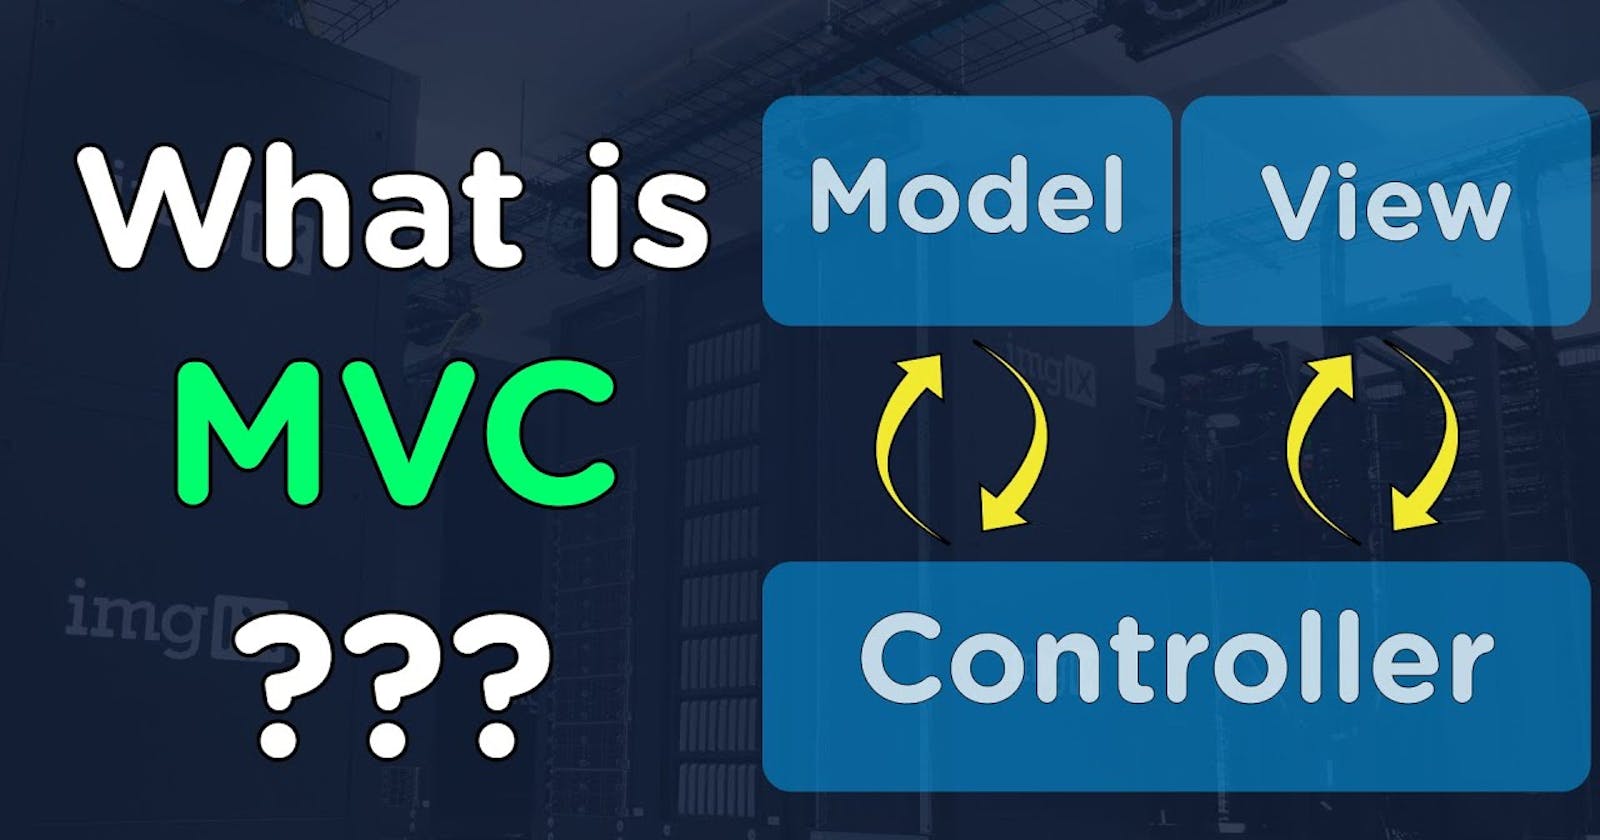 Model View Controller Explained